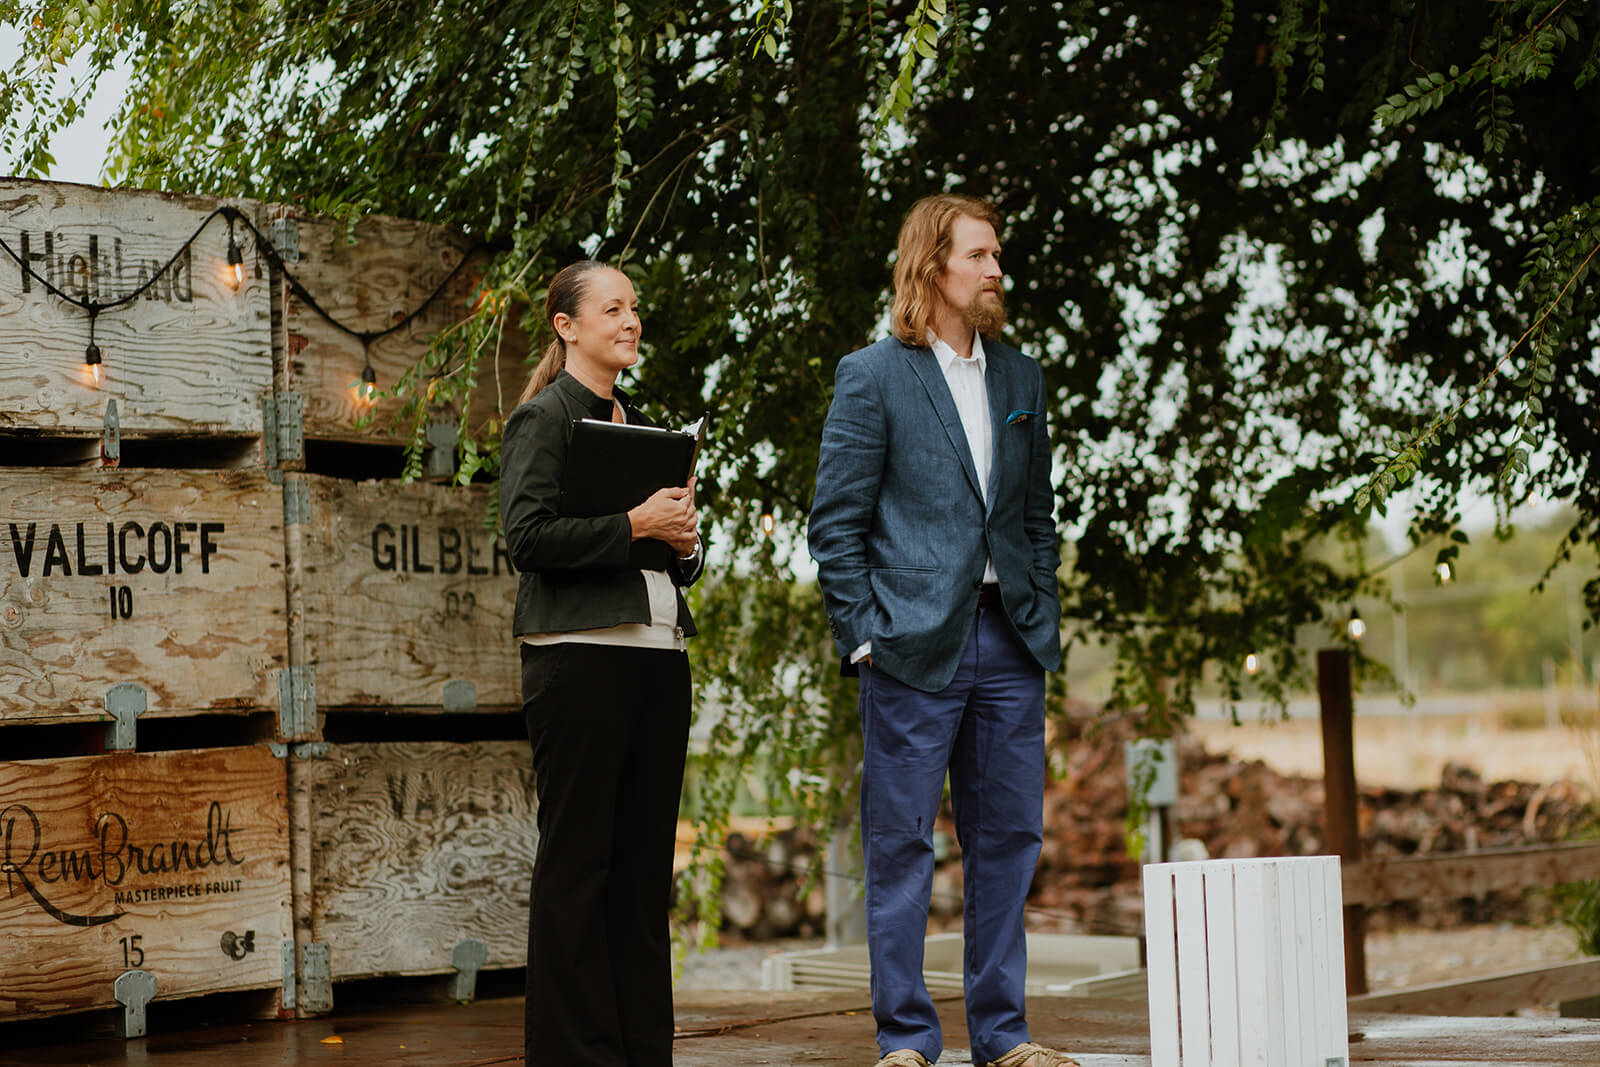 Groom standing at wedding altar with officiant